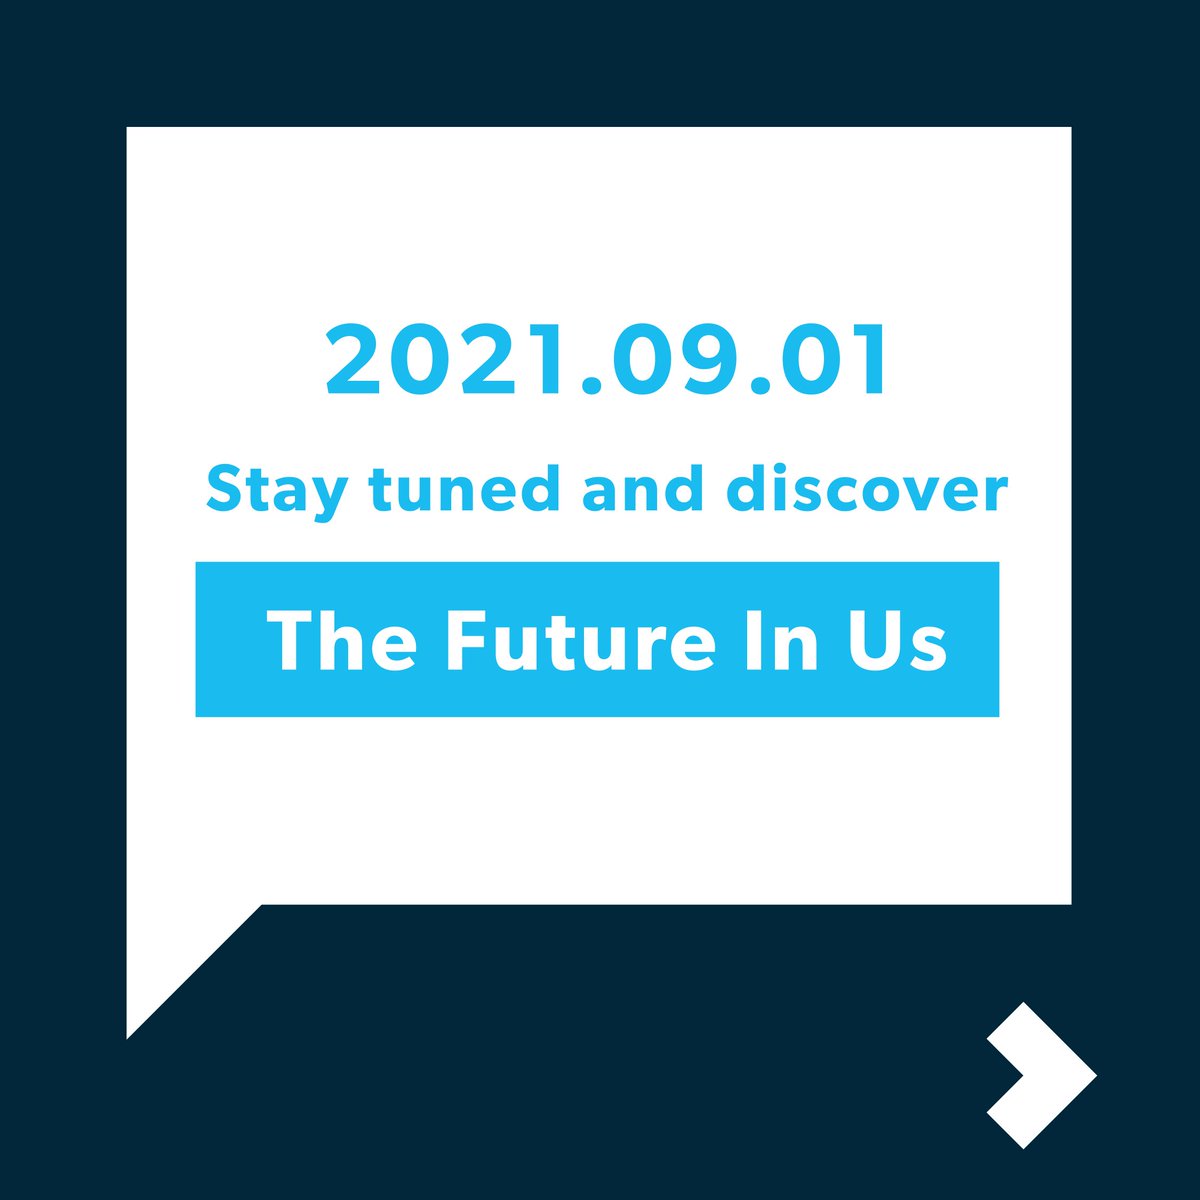 So, what’s next?  ▶ ▶ ▶
.
.
2021/9/1 
Stay tuned and discover the future in us!

 #farewell #whatnext #surprise #celebration2021 #discovery #future #empower #education #dreamuniversity #institution #inspire #GlobalEducation #studyabroad2021 #studyquotes